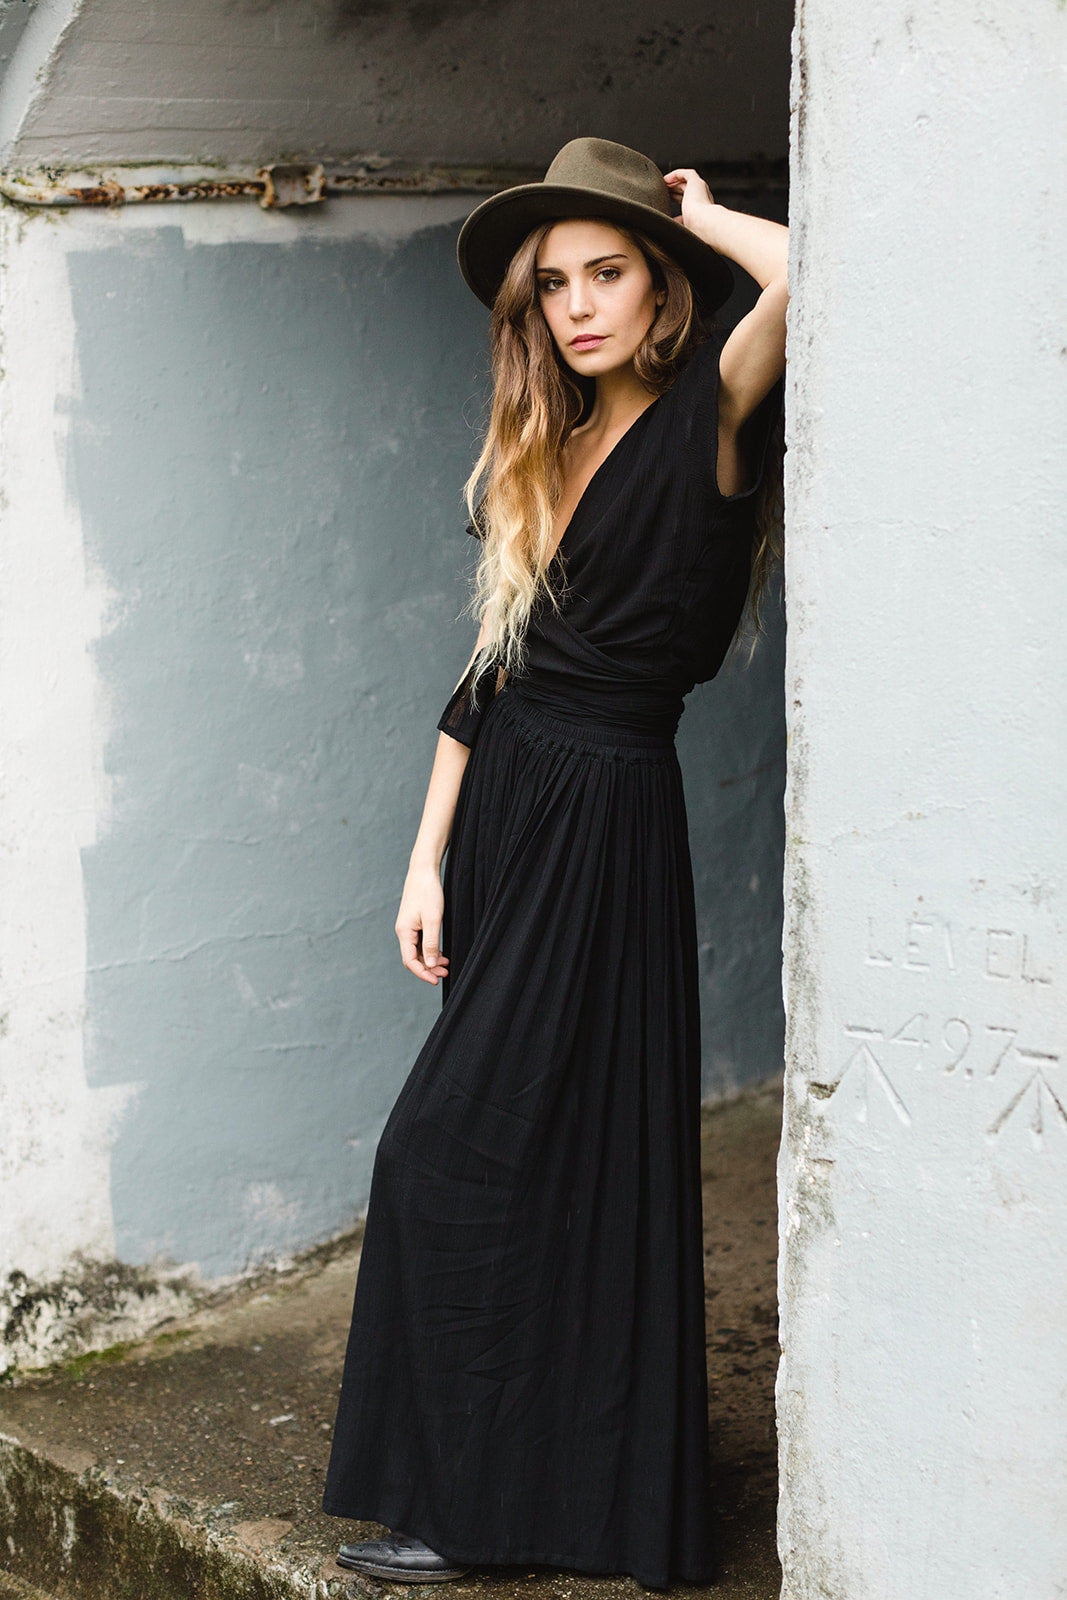 All Bohemian Women's Fashion - Ethically Made | By Poème Clothing